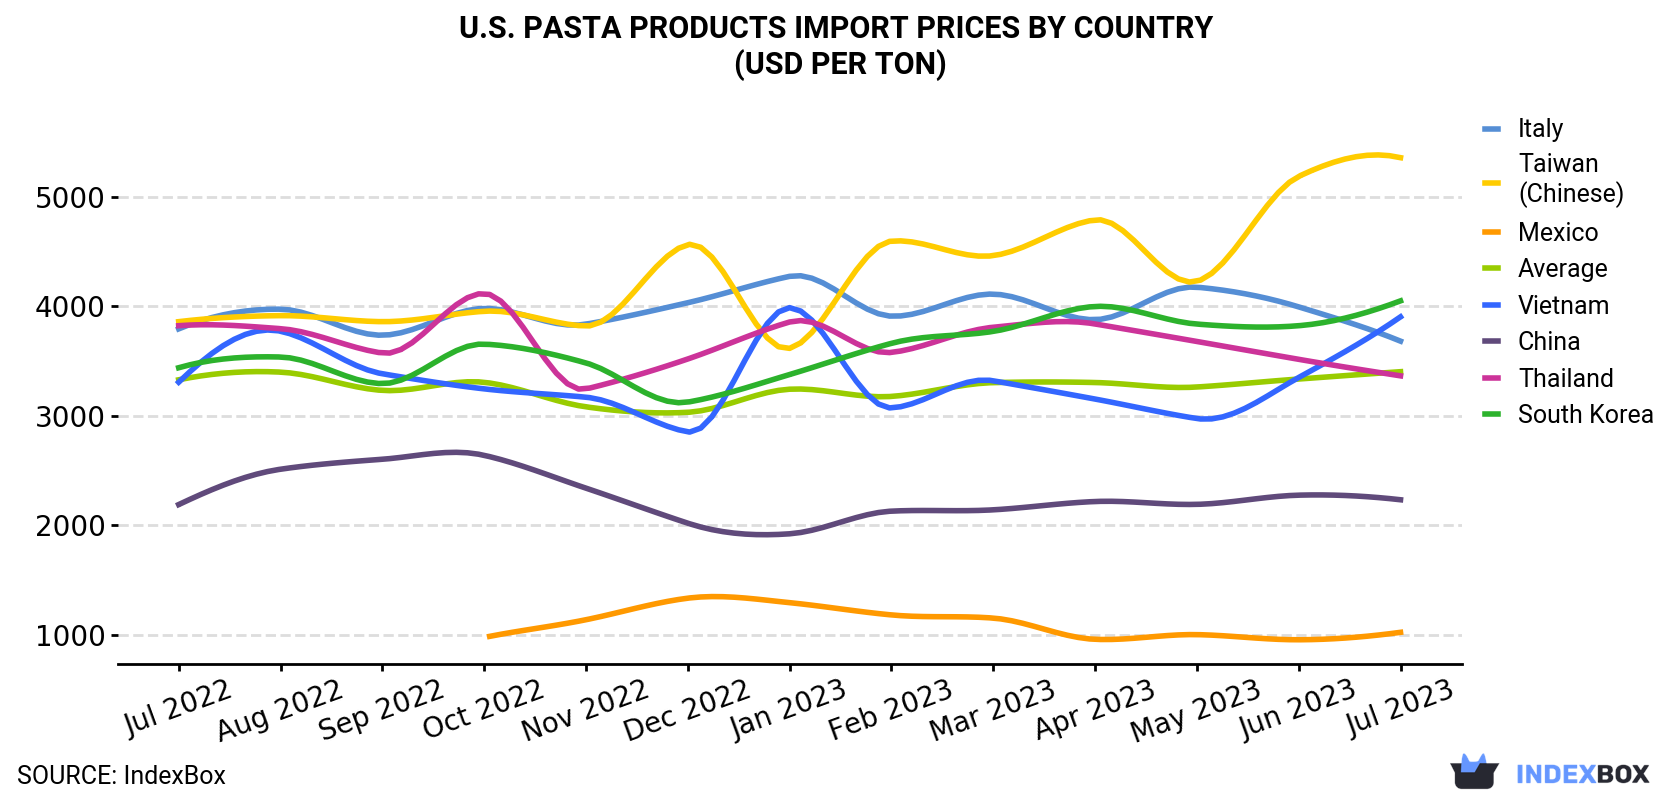 U.S. Pasta Products Import Prices By Country (USD Per Ton)